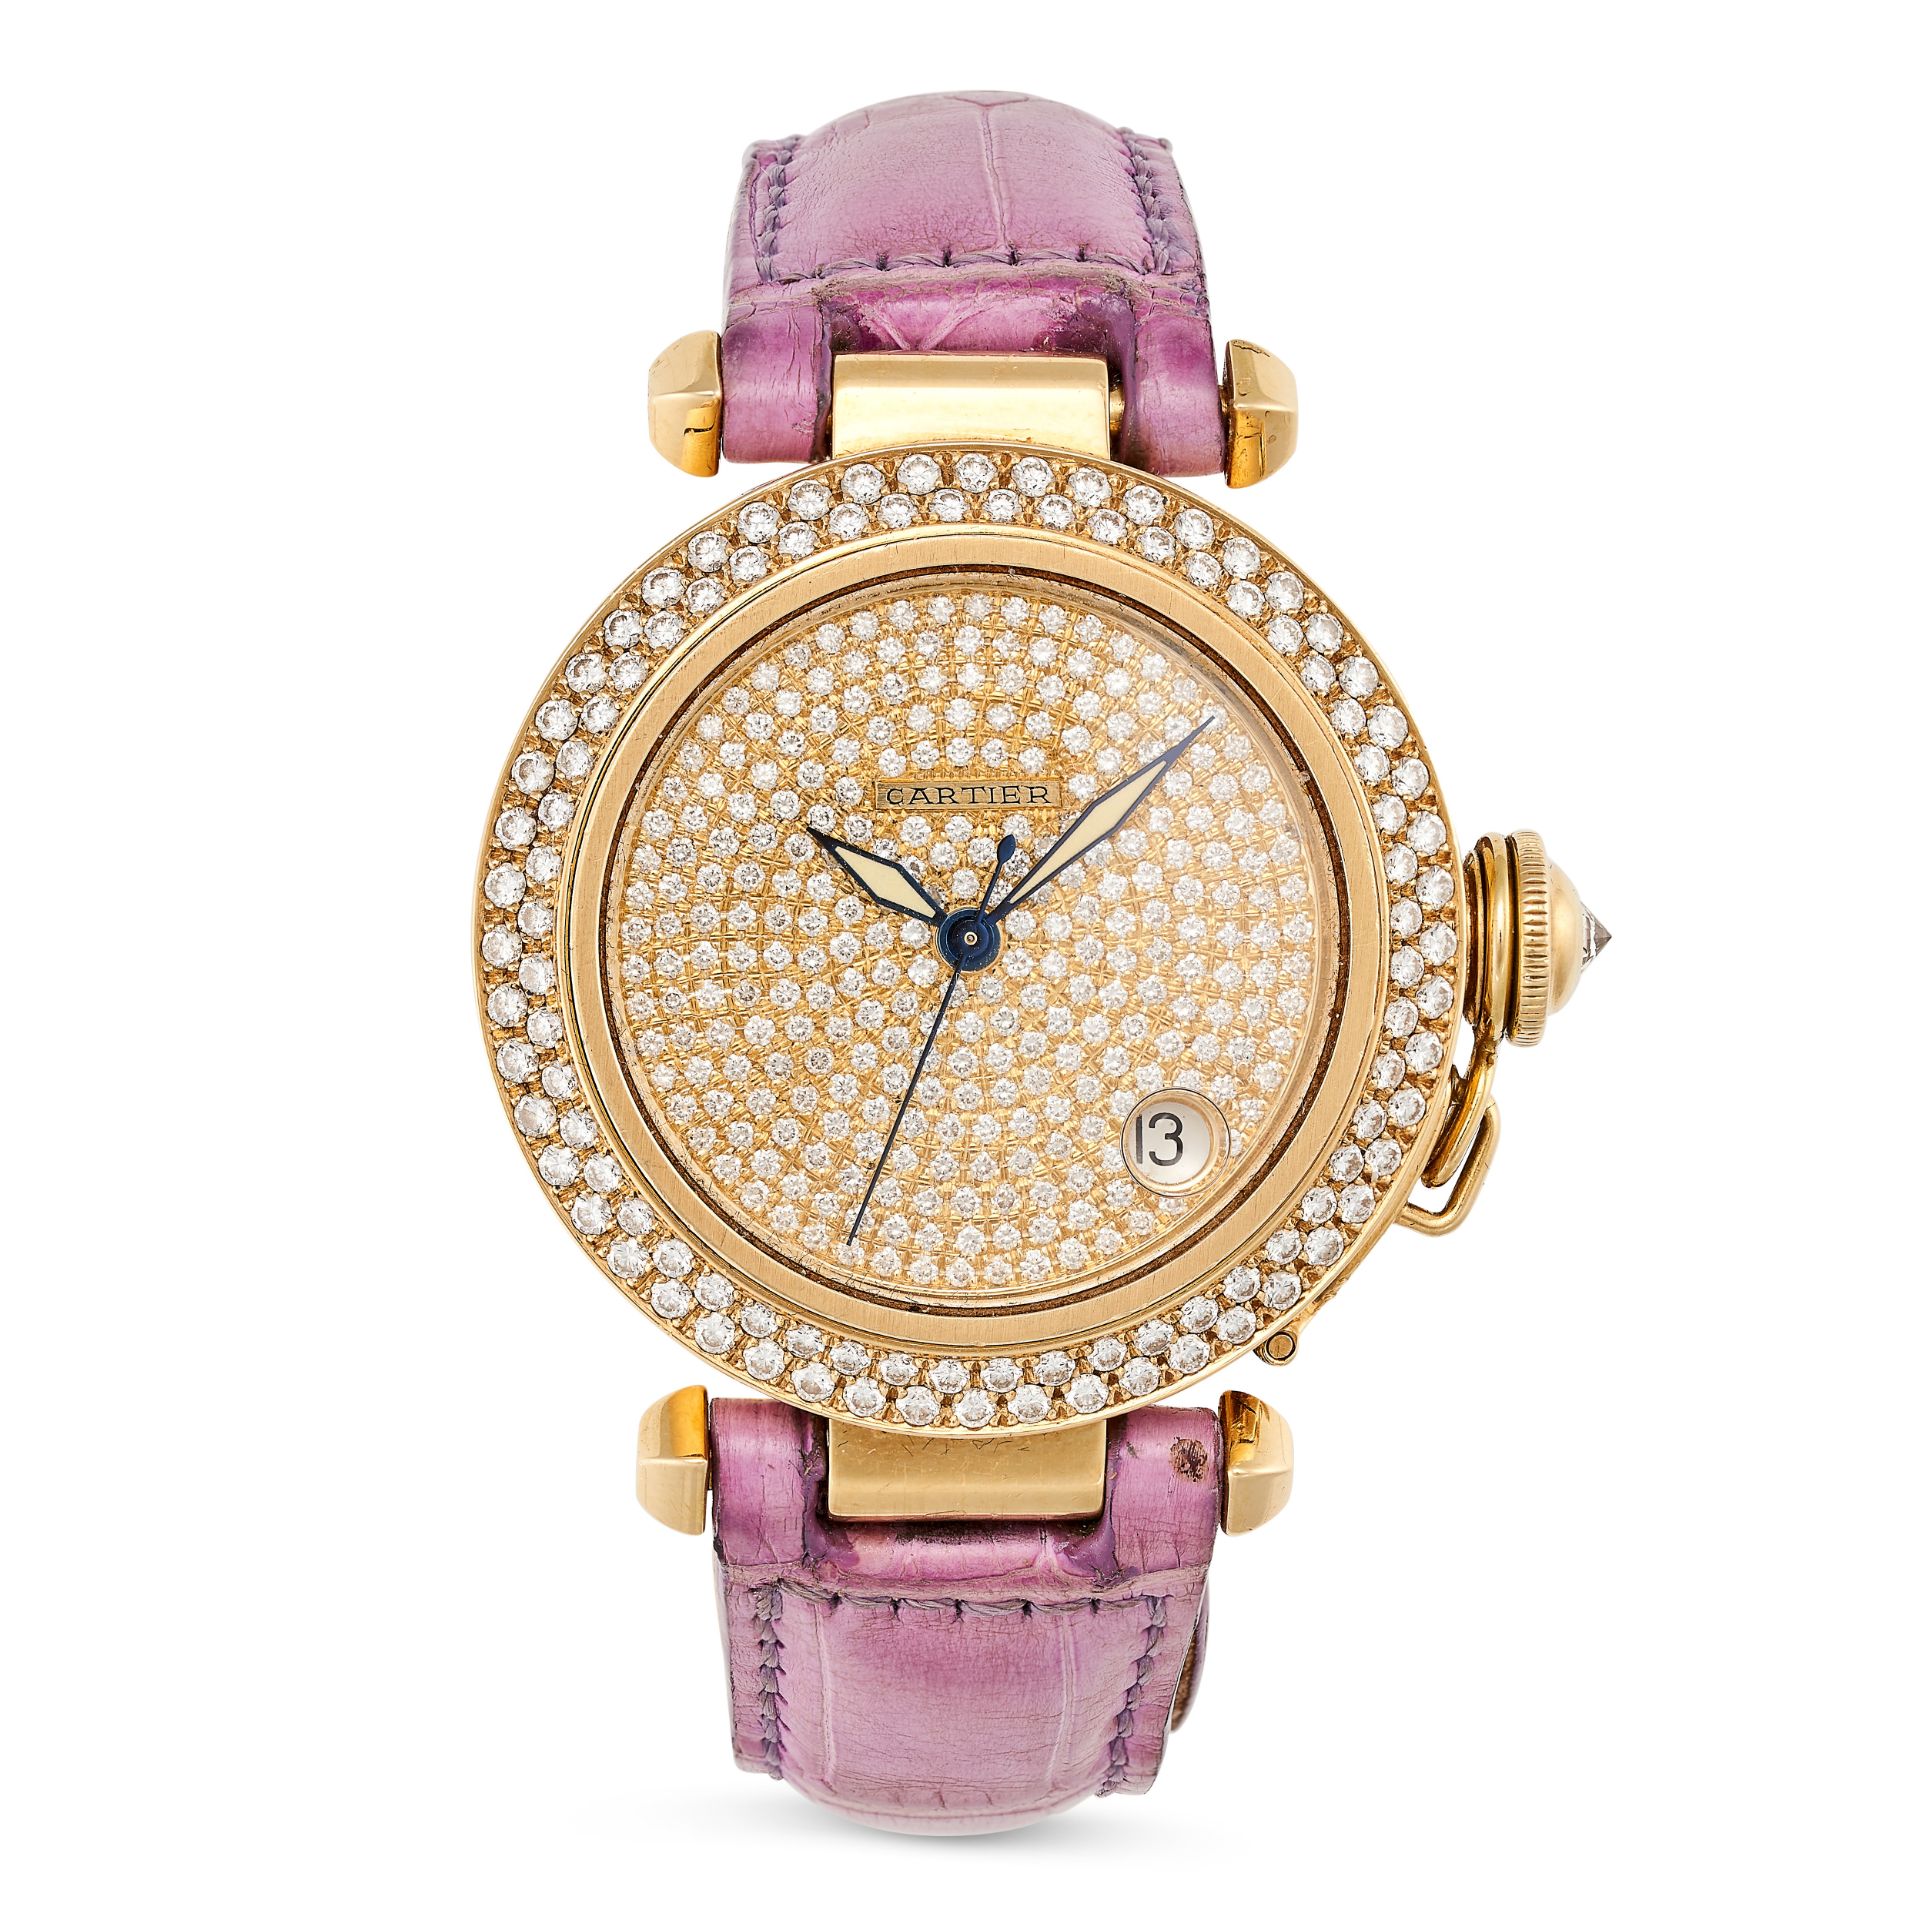 CARTIER, A PASHA DE CARTIER DIAMOND WATCH in 18ct yellow gold, the round watch face set with roun...